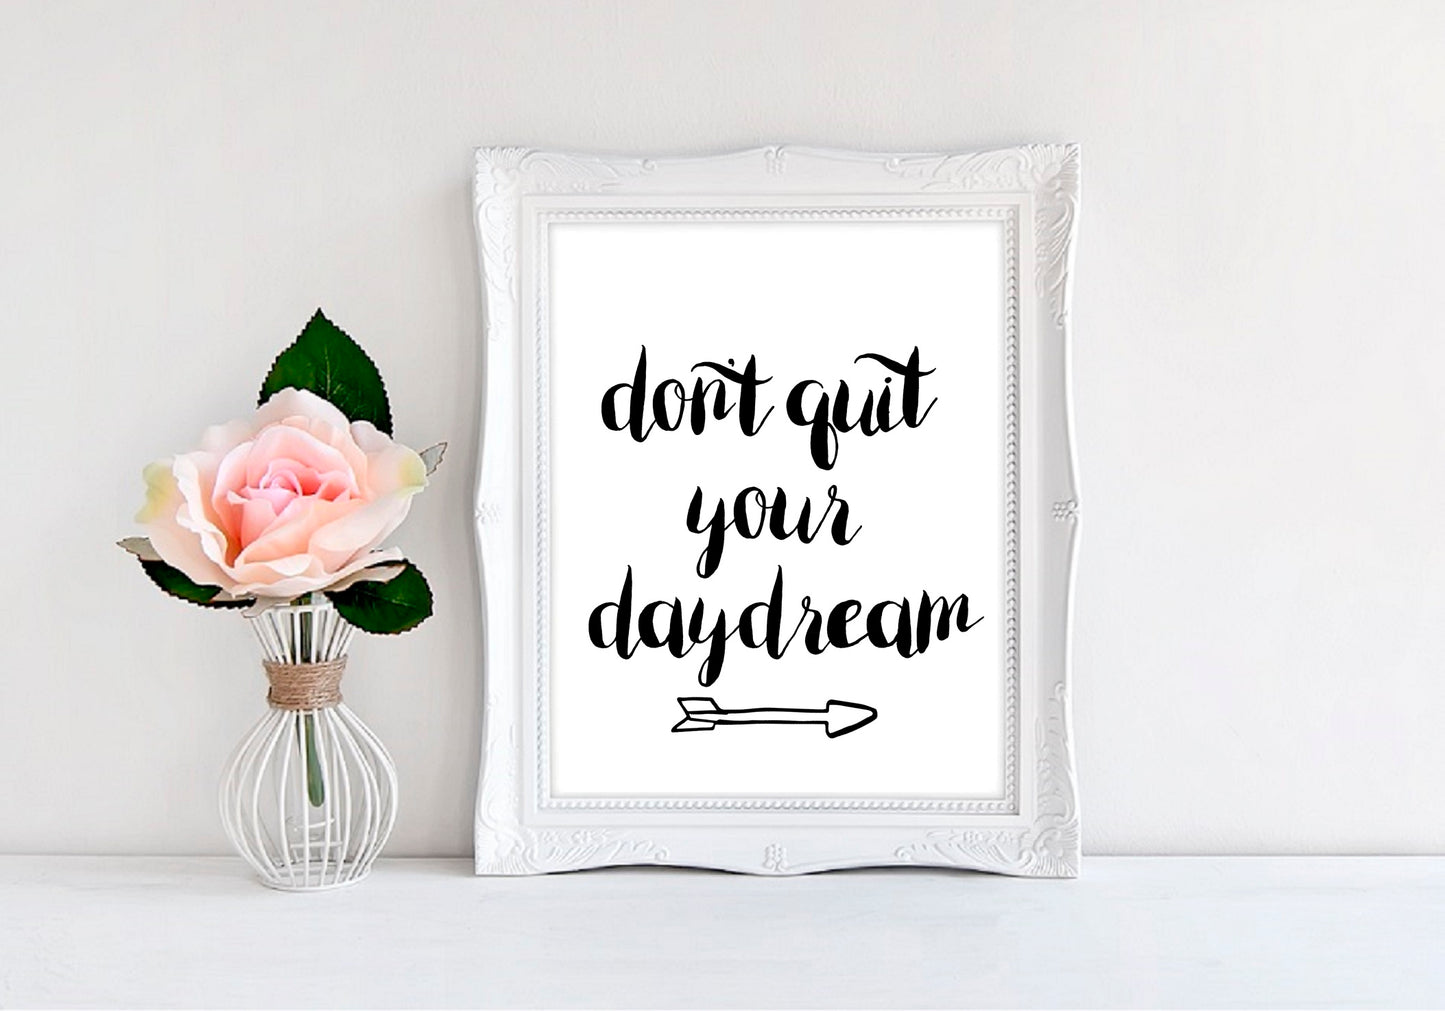 Don't Quit Your Daydream - 8"x10" Wall Print - MoonlightMakers